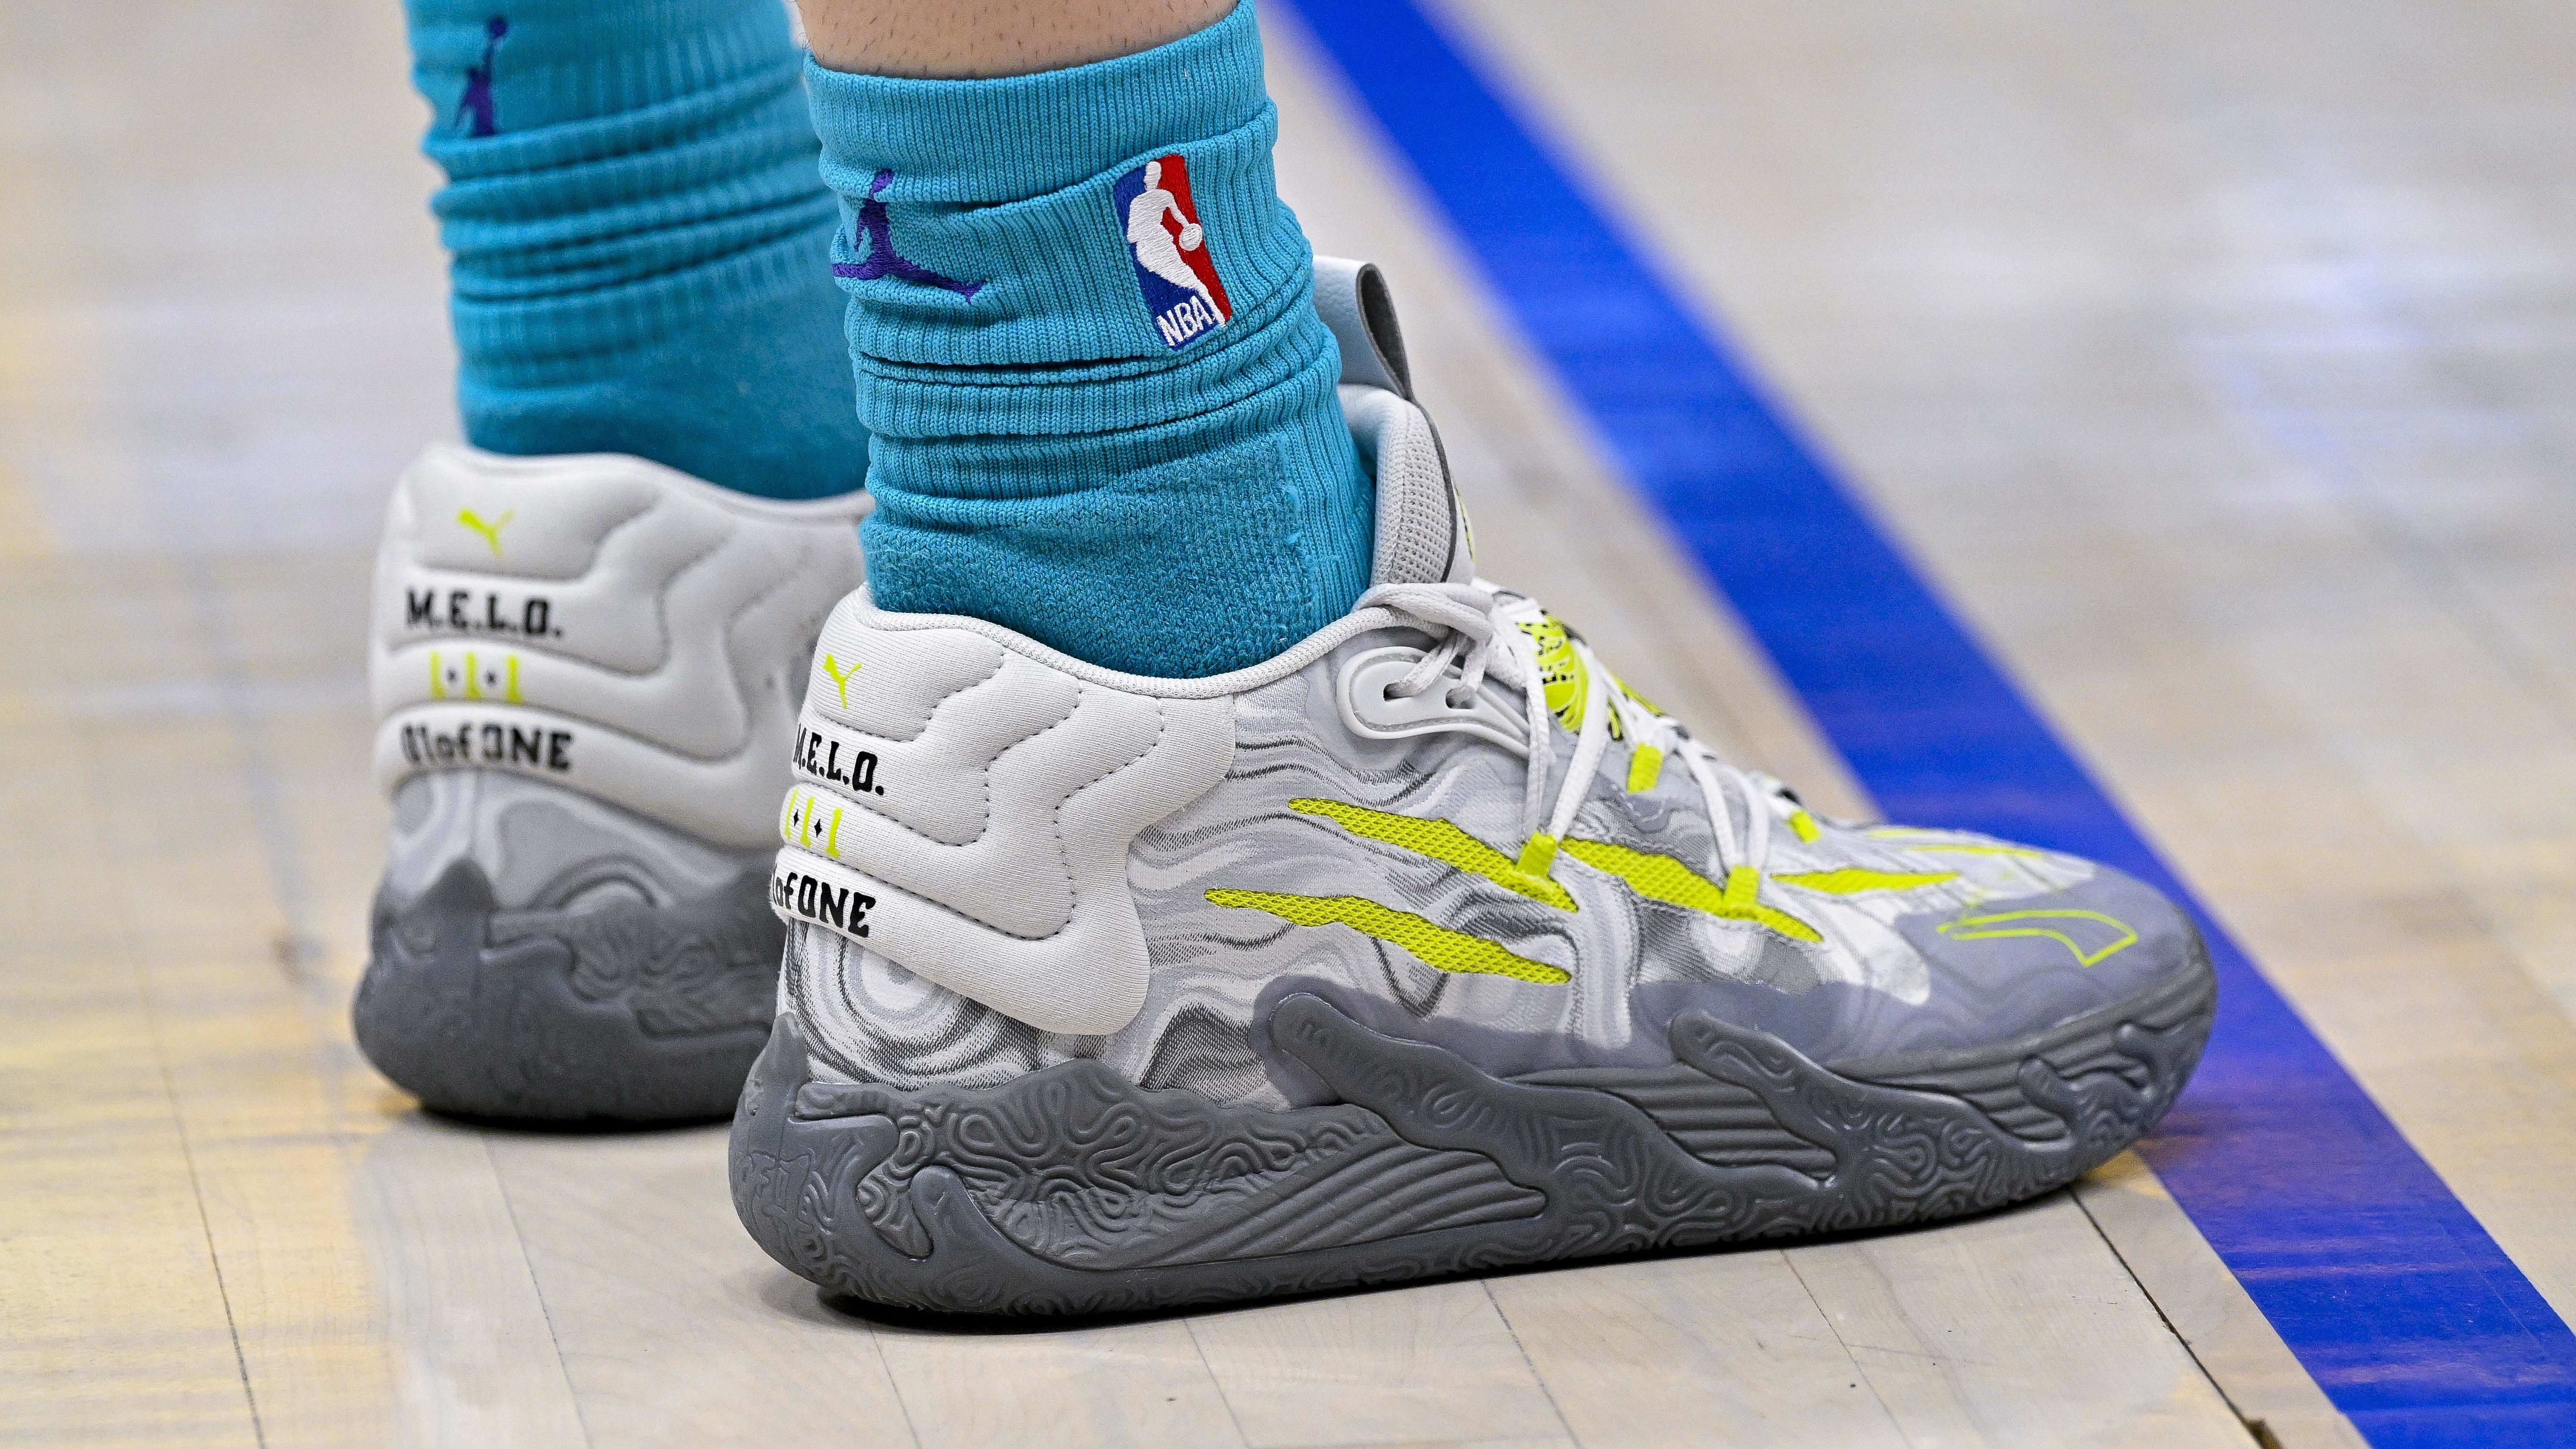 Charlotte Hornets guard LaMelo Ball's grey and green PUMA sneakers.